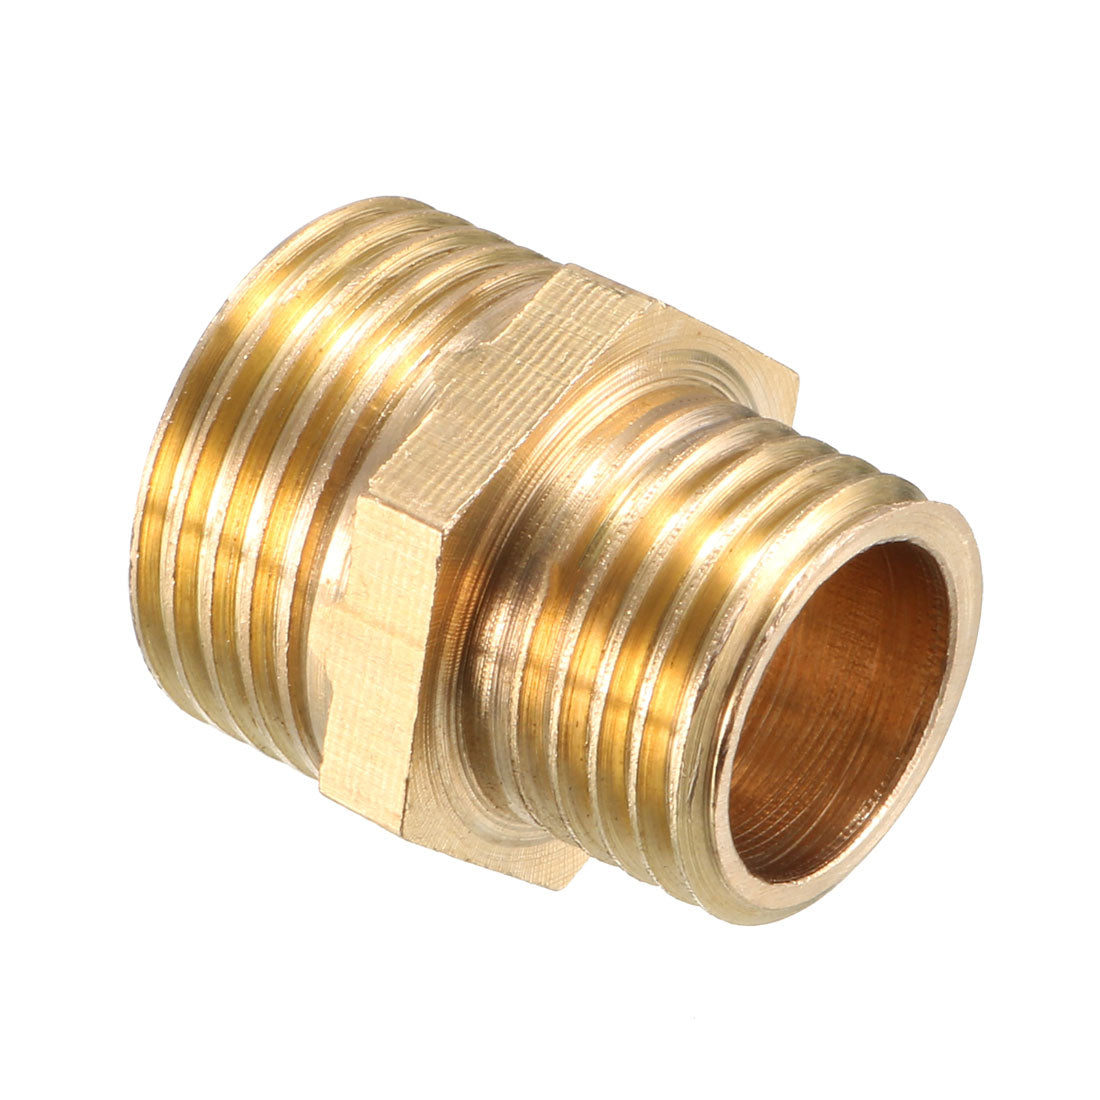 uxcell Uxcell Brass Pipe Fitting Reducing Hex Bushing 3/8 BSP Male x 1/4 BSP Male Adapter